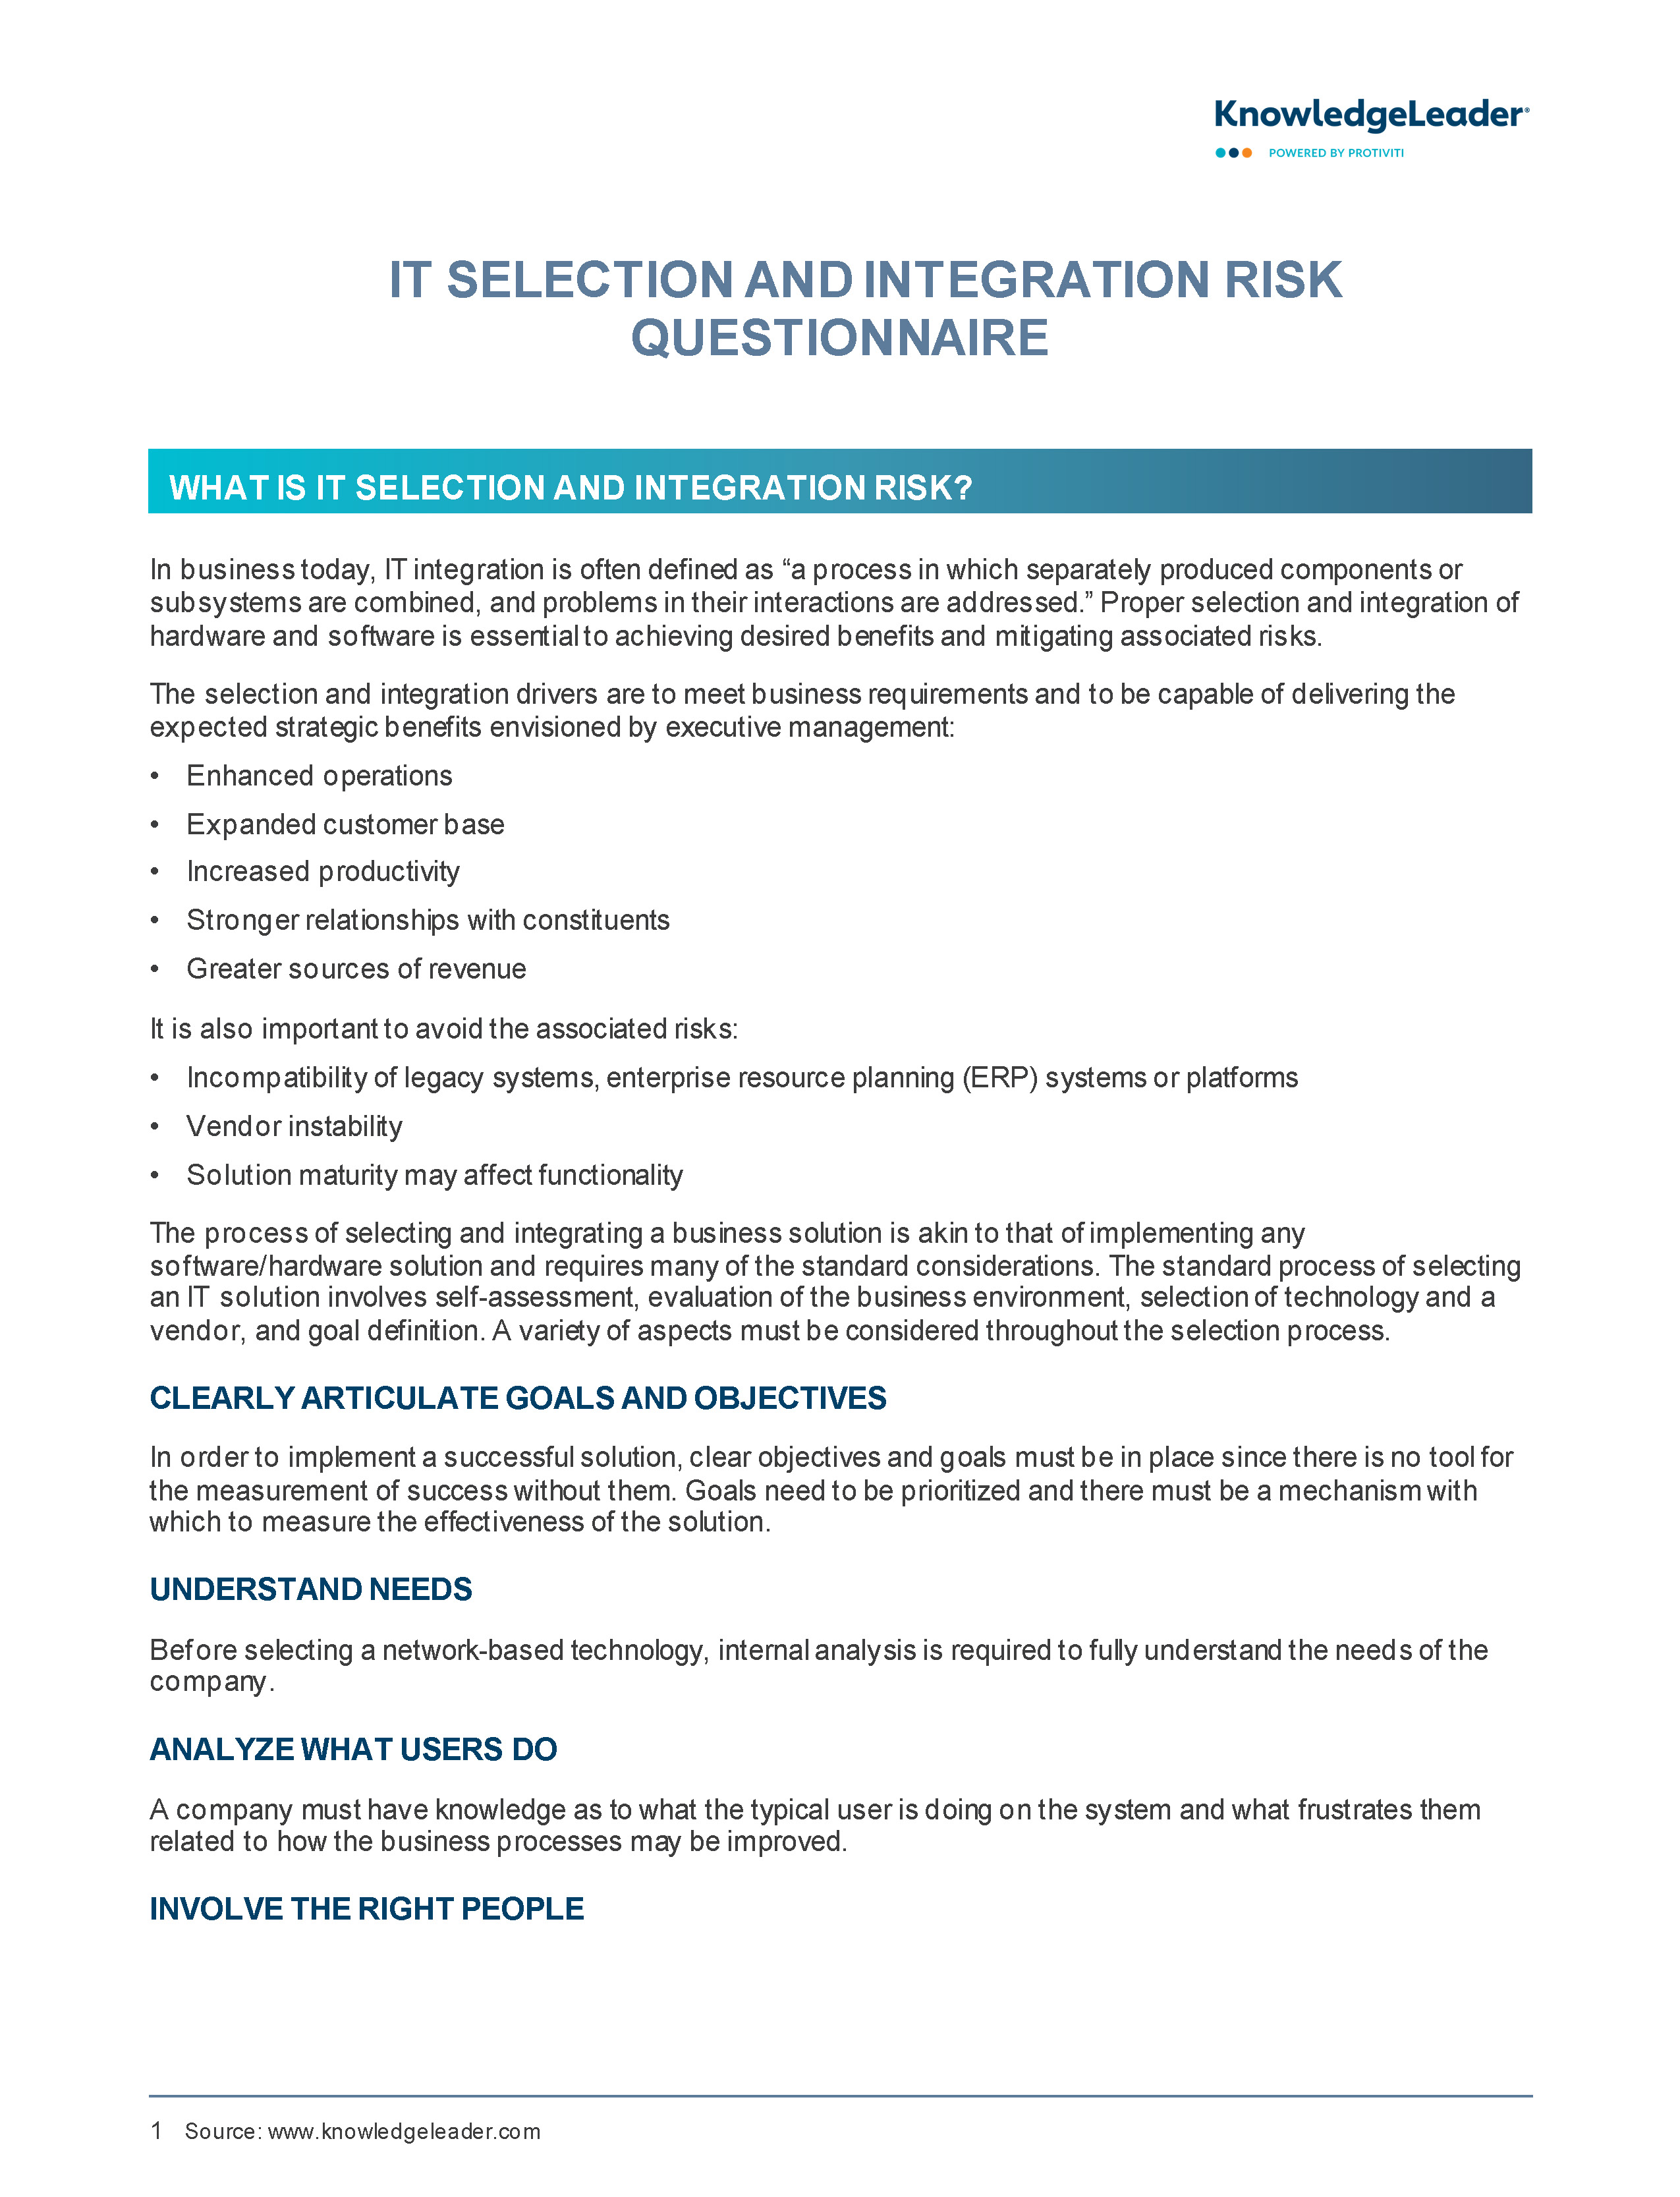 Screenshot of the first page of IT Selection or Integration Risk Questionnaire